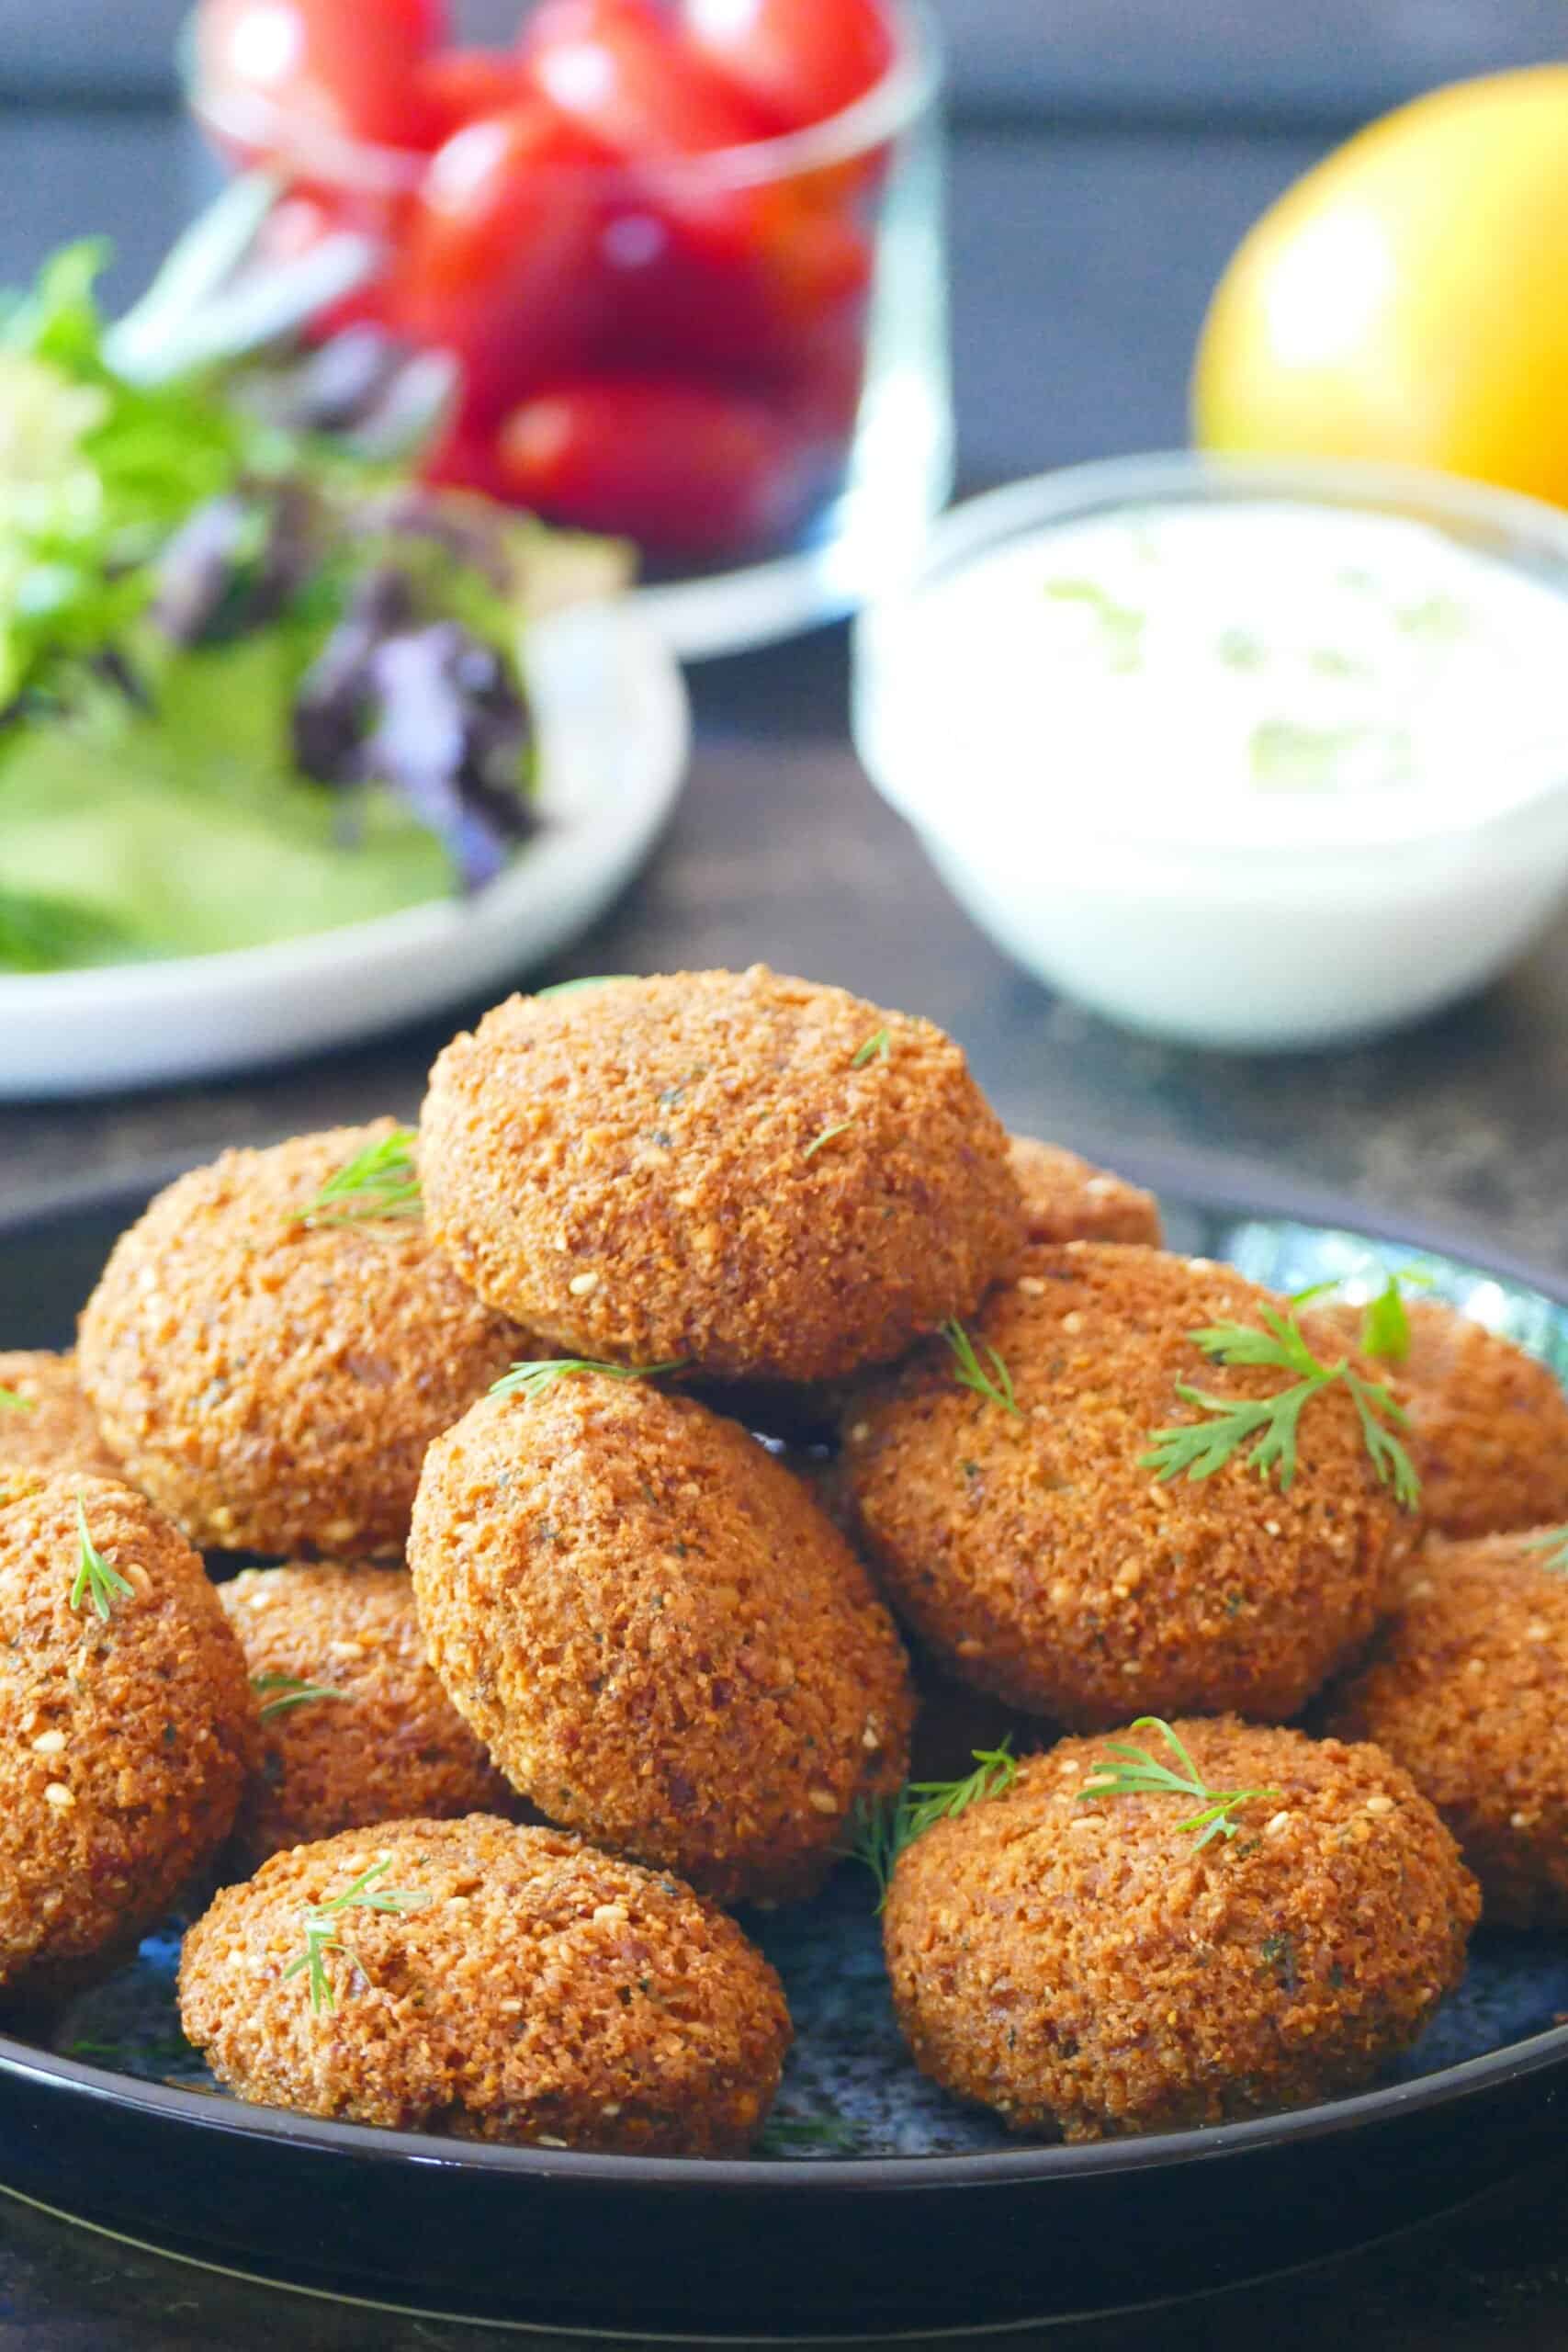 Air fryer falafel - golden brown, crunchy falafel stacked on a plate with lettuce tomato, white sauce and lemon in background